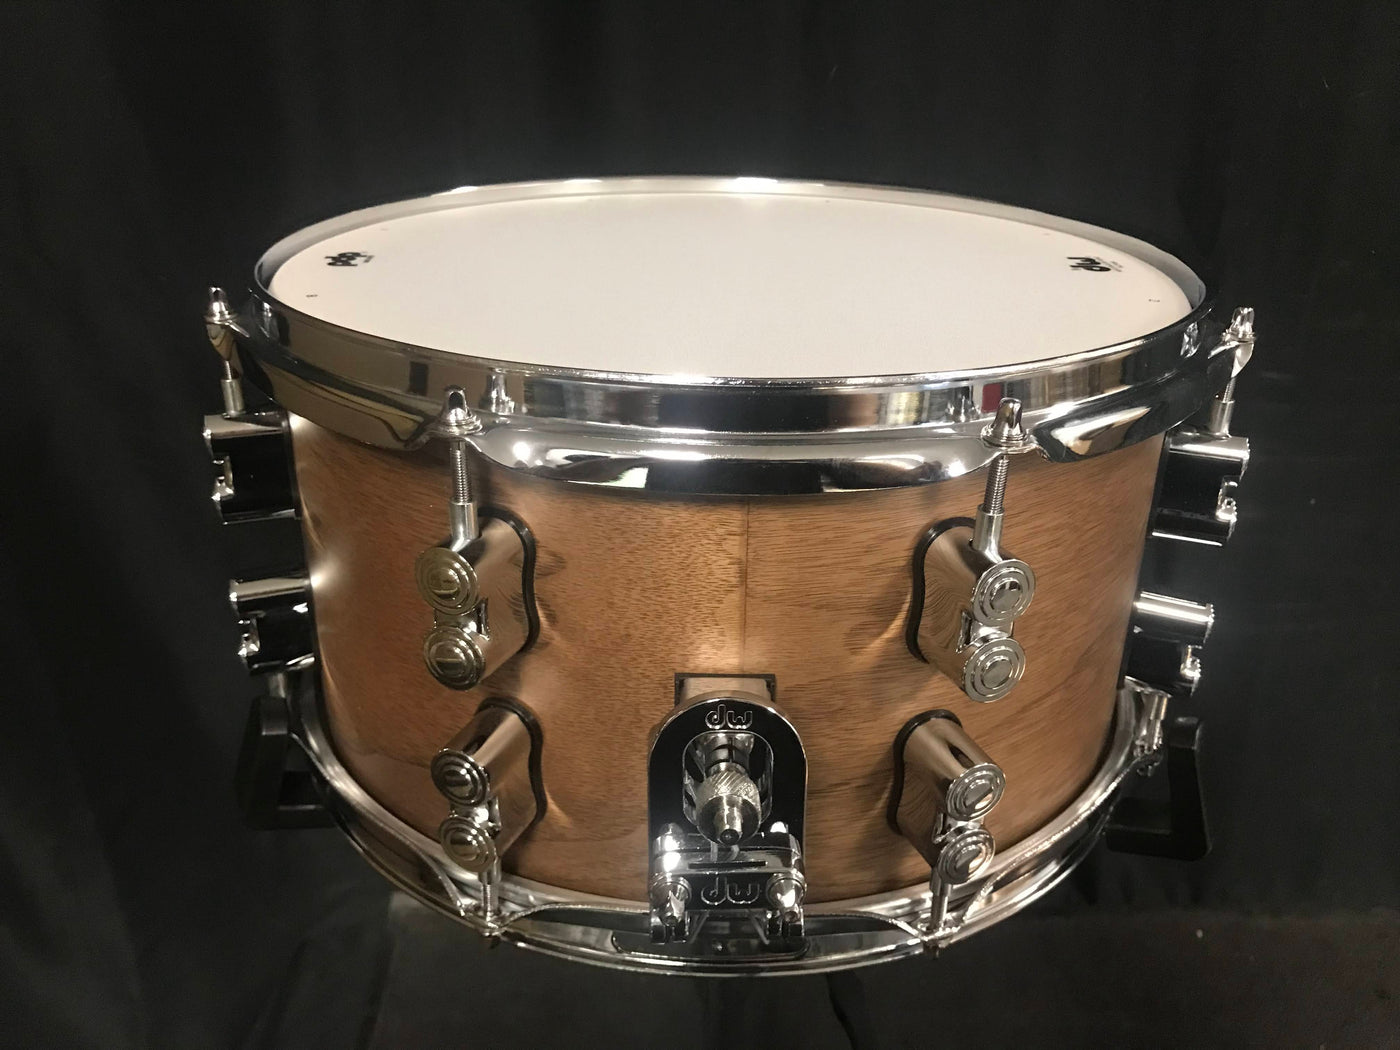 Limited Edition Concept Maple/Walnut Snare Drum